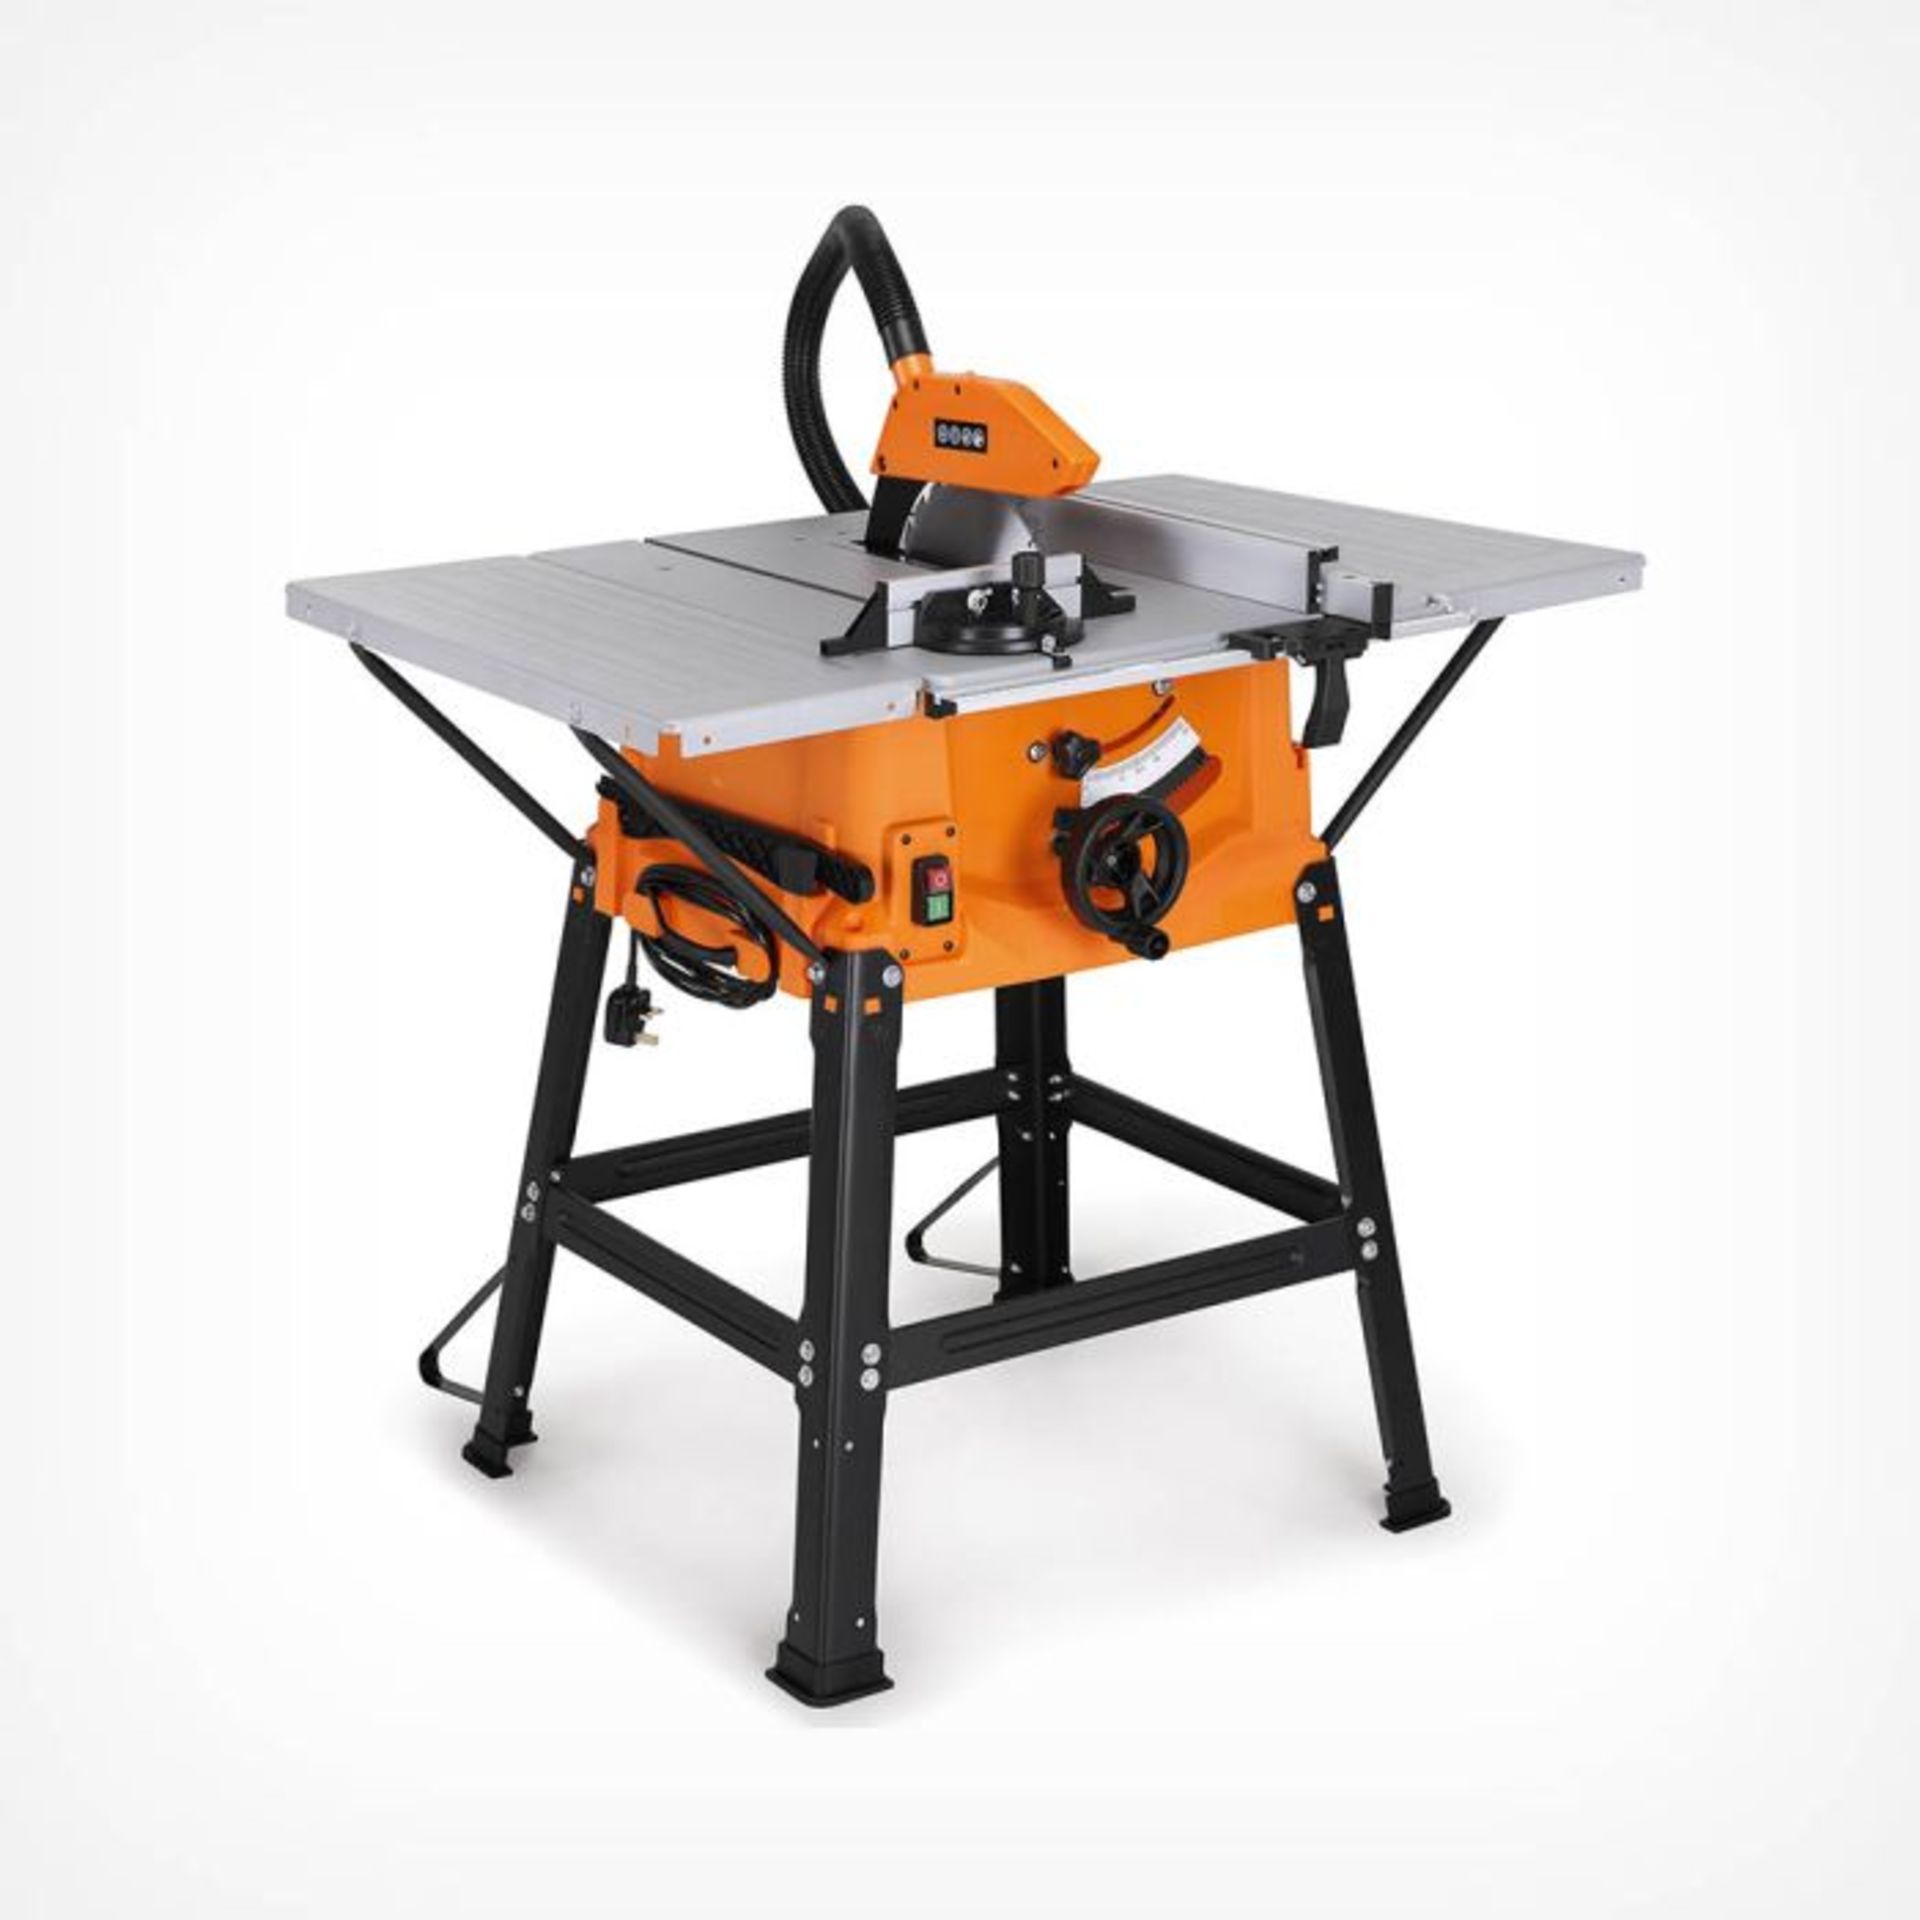 1800W Table Saw. Featuring a high-performance, carbide-tipped 250mm cutting blade, the saw allows